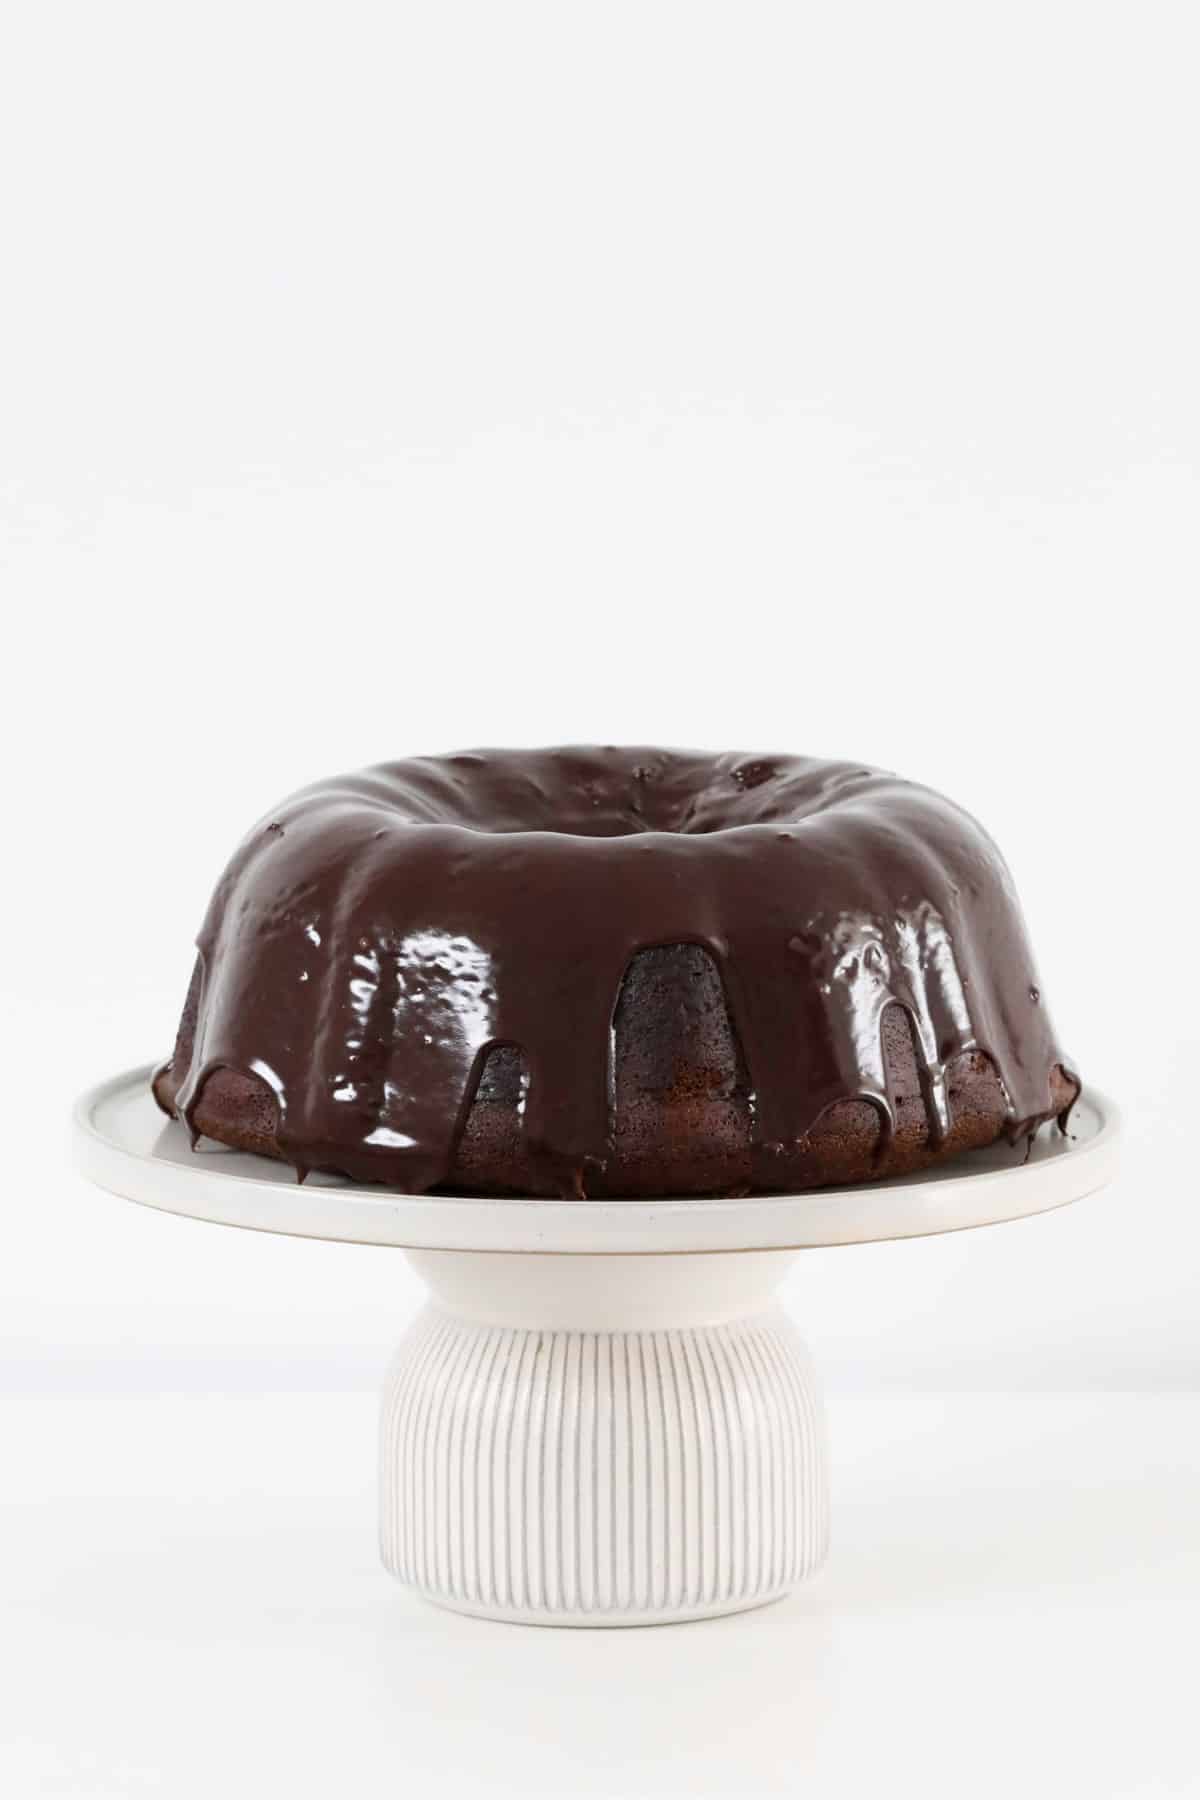 A ganache covered chocolate pound cake on a cake stand.